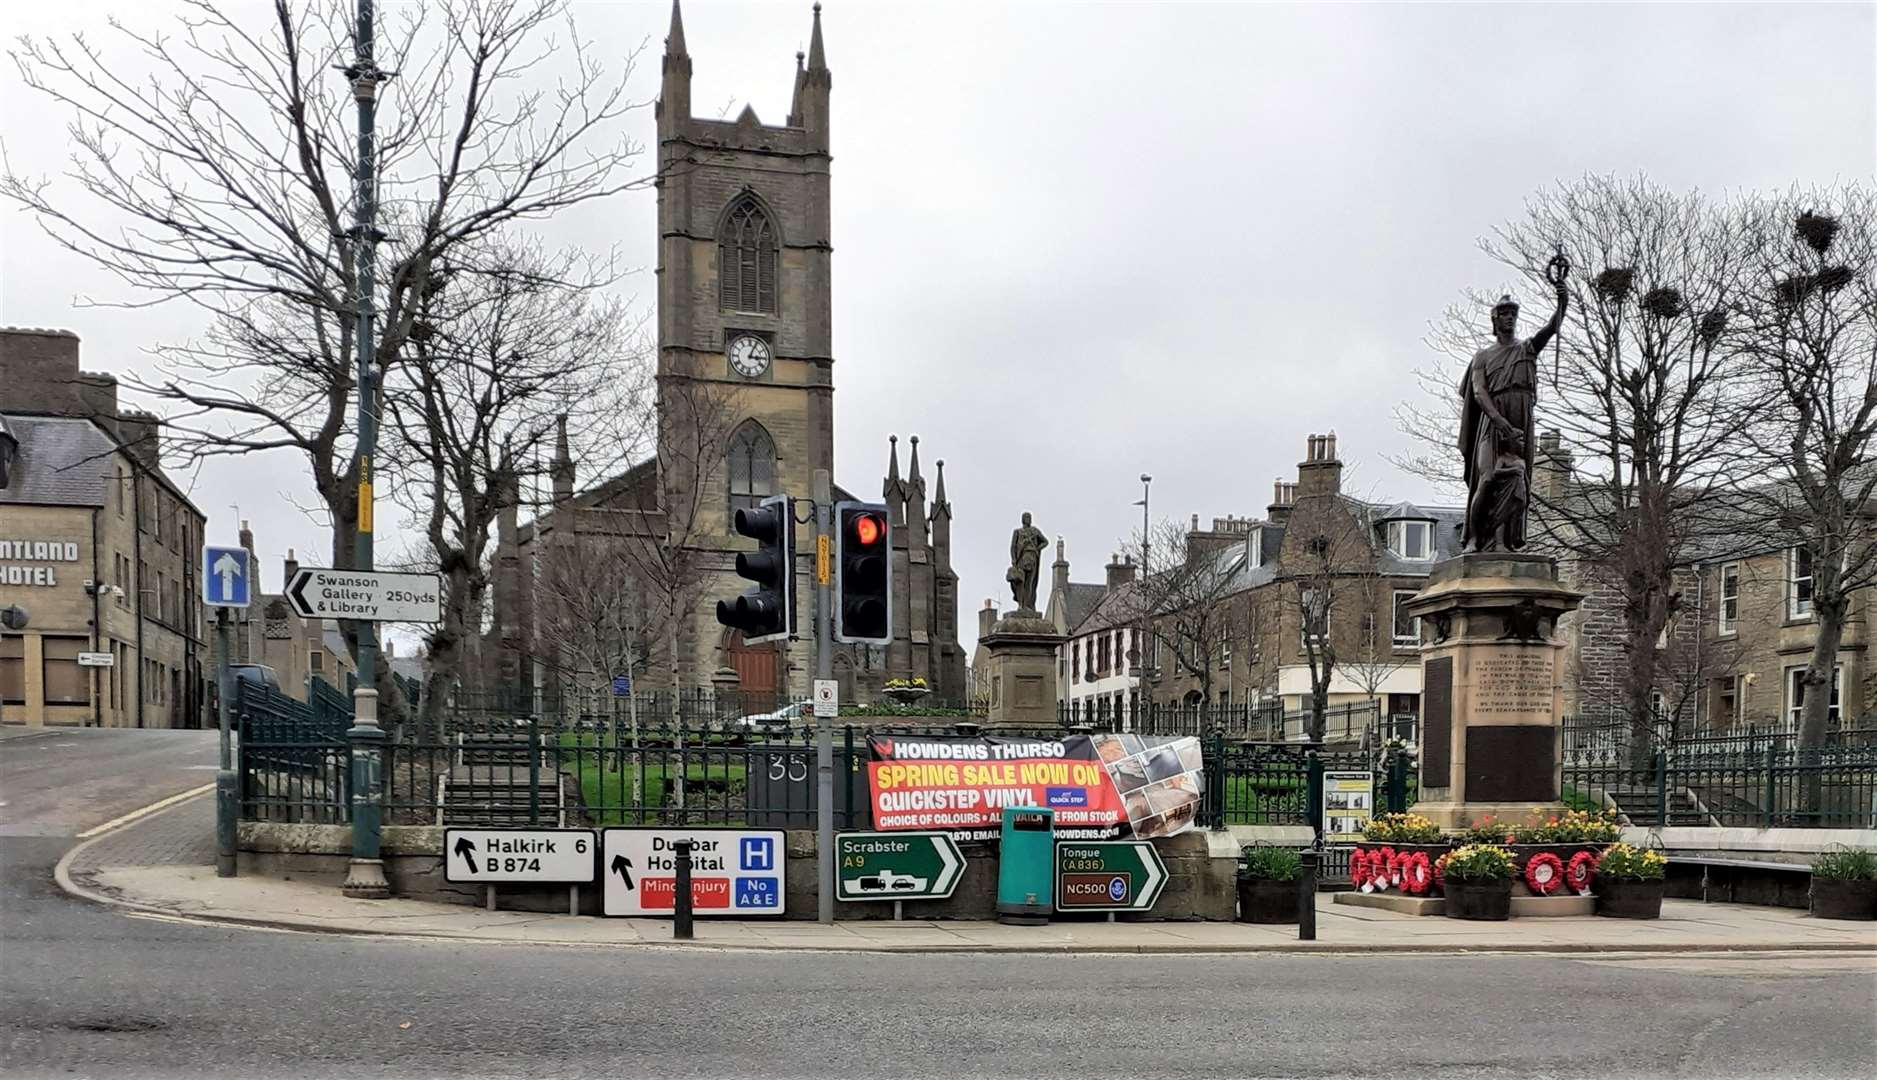 The advertising banner was on a railing in Sir John's Square near to Thurso's war memorial and was removed by Alexander Glasgow.